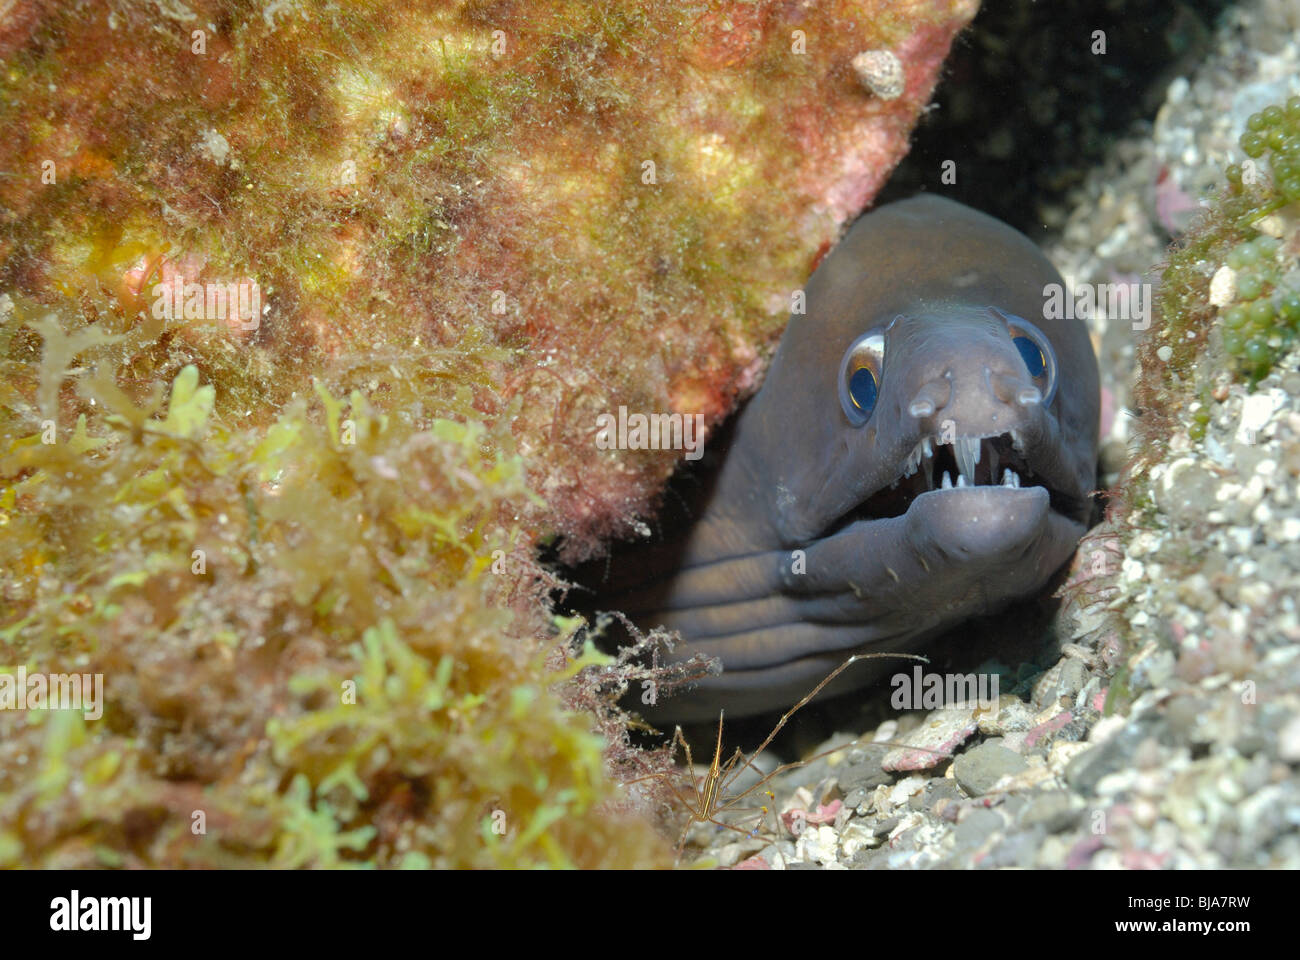 Purplemouth moray eel in the Gulf of Mexico. Stock Photo